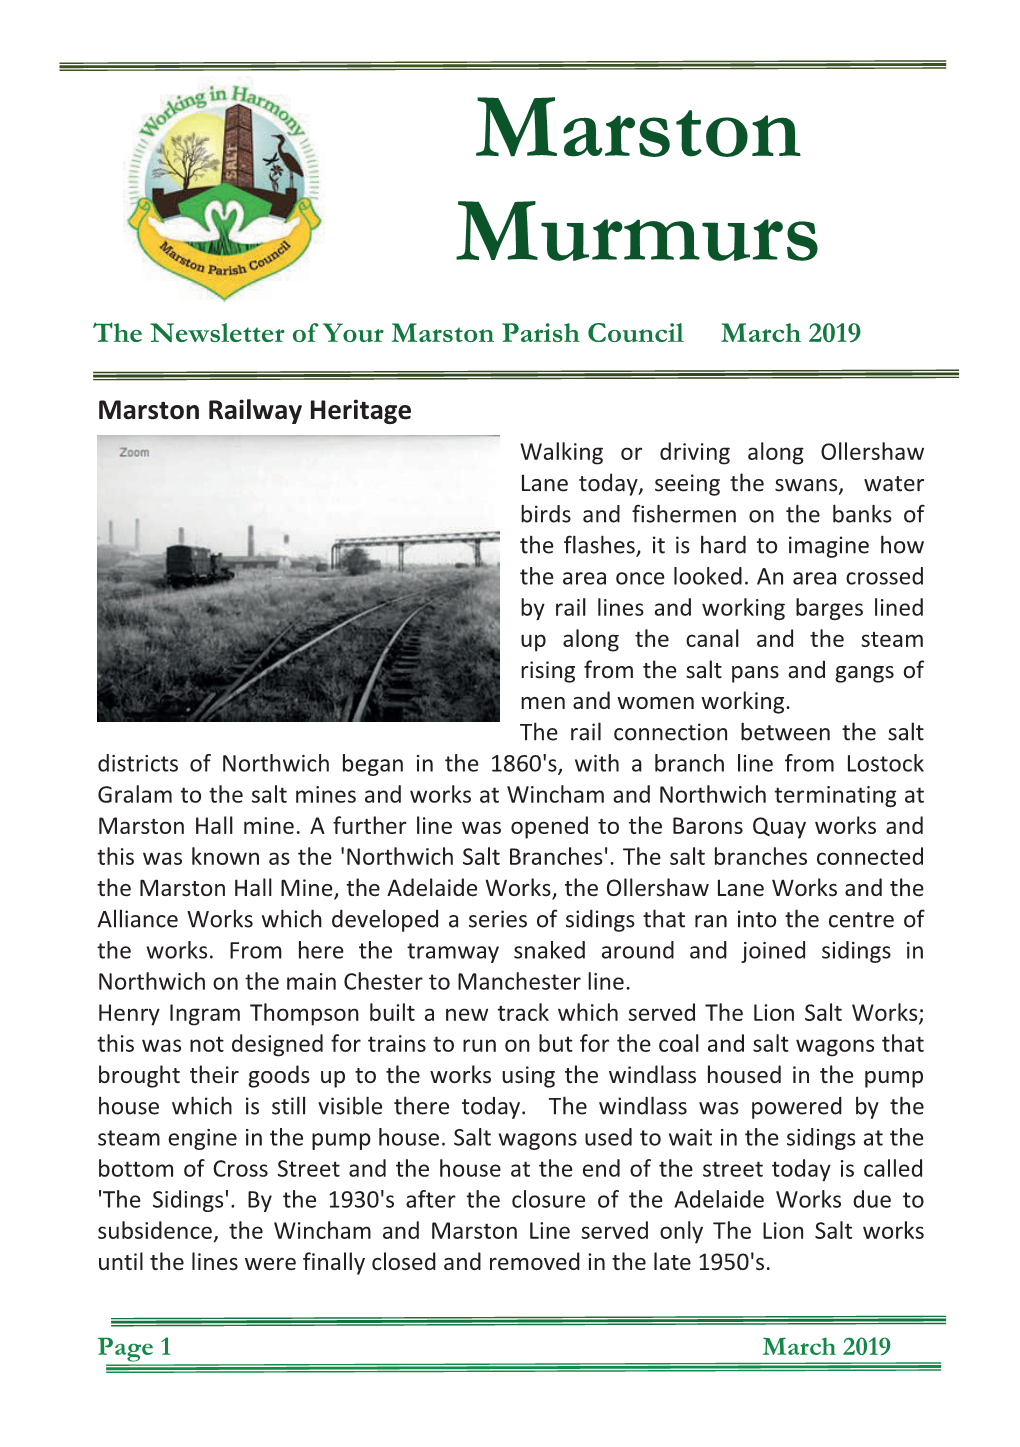 Marston Murmurs Newsletters Are Also on This Website